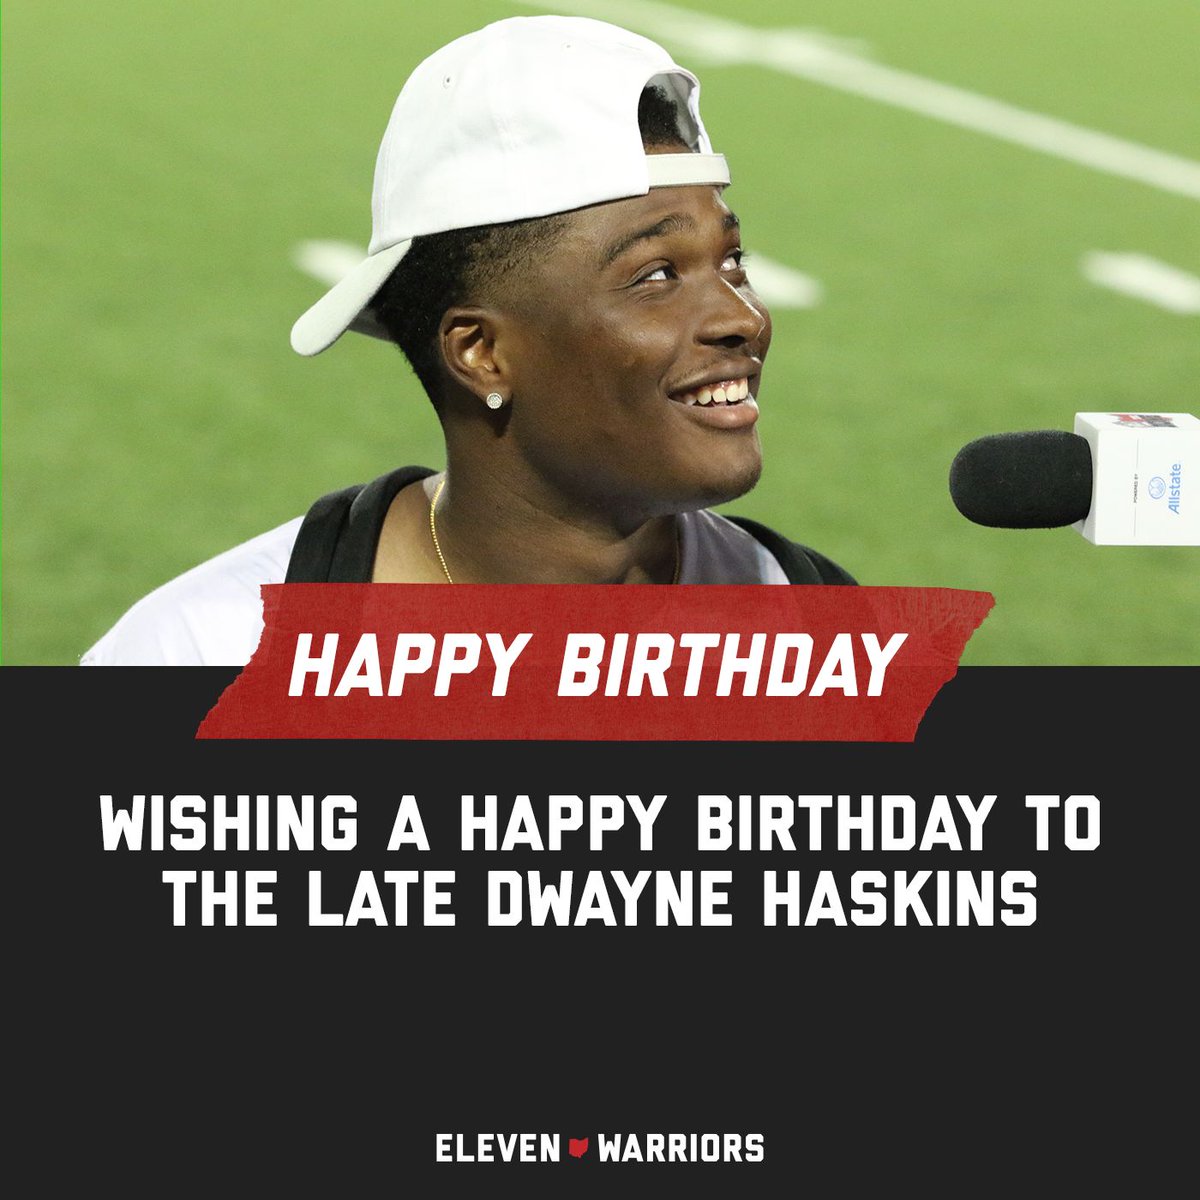 Wishing a happy birthday to the late Dwayne Haskins.